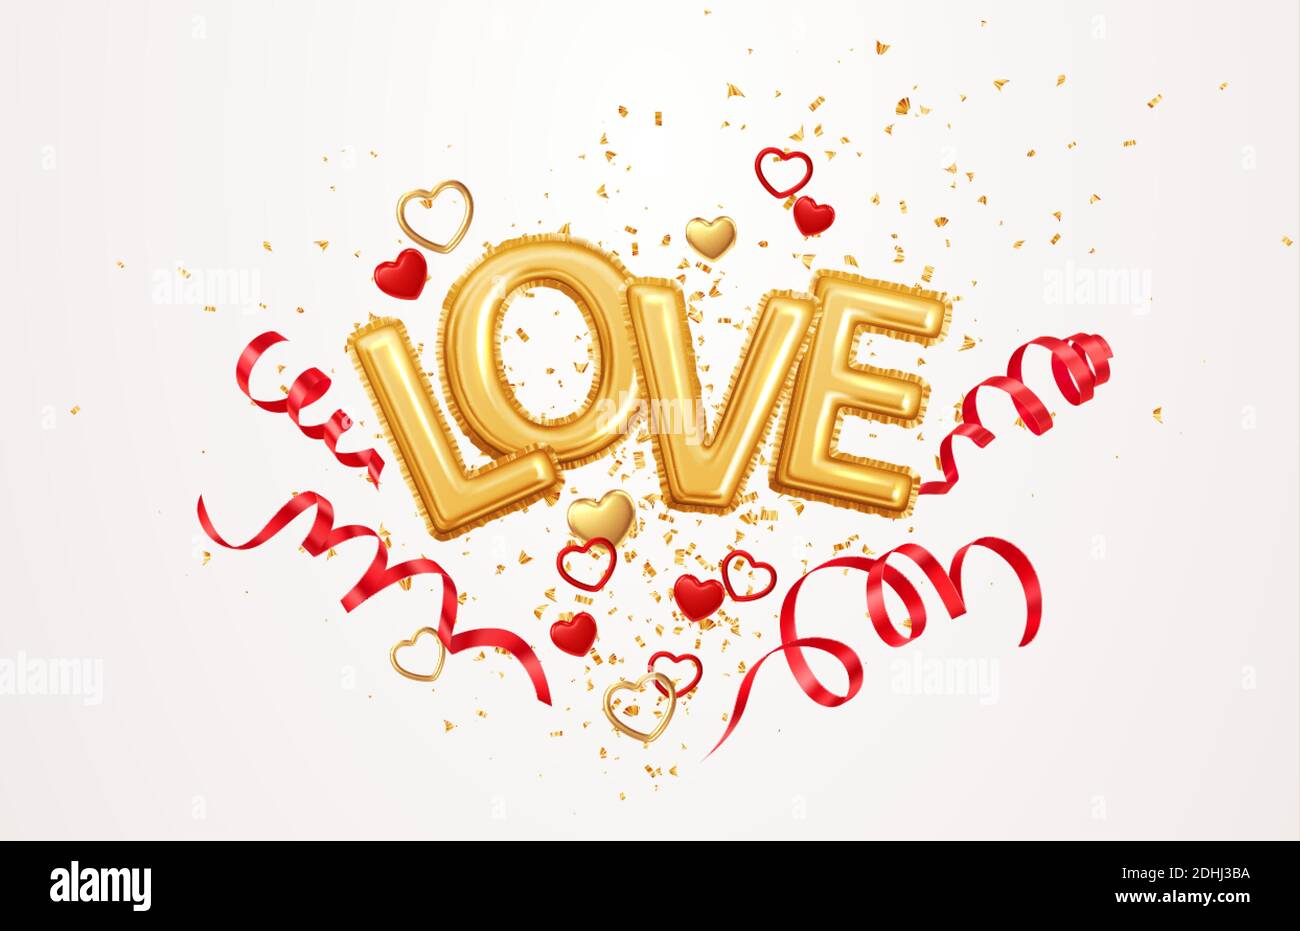 Inscription love helium balloons on a background of golden confetti and red swirling streamer ribbons Happy Valentines Day festive background. Vector Stock Vector